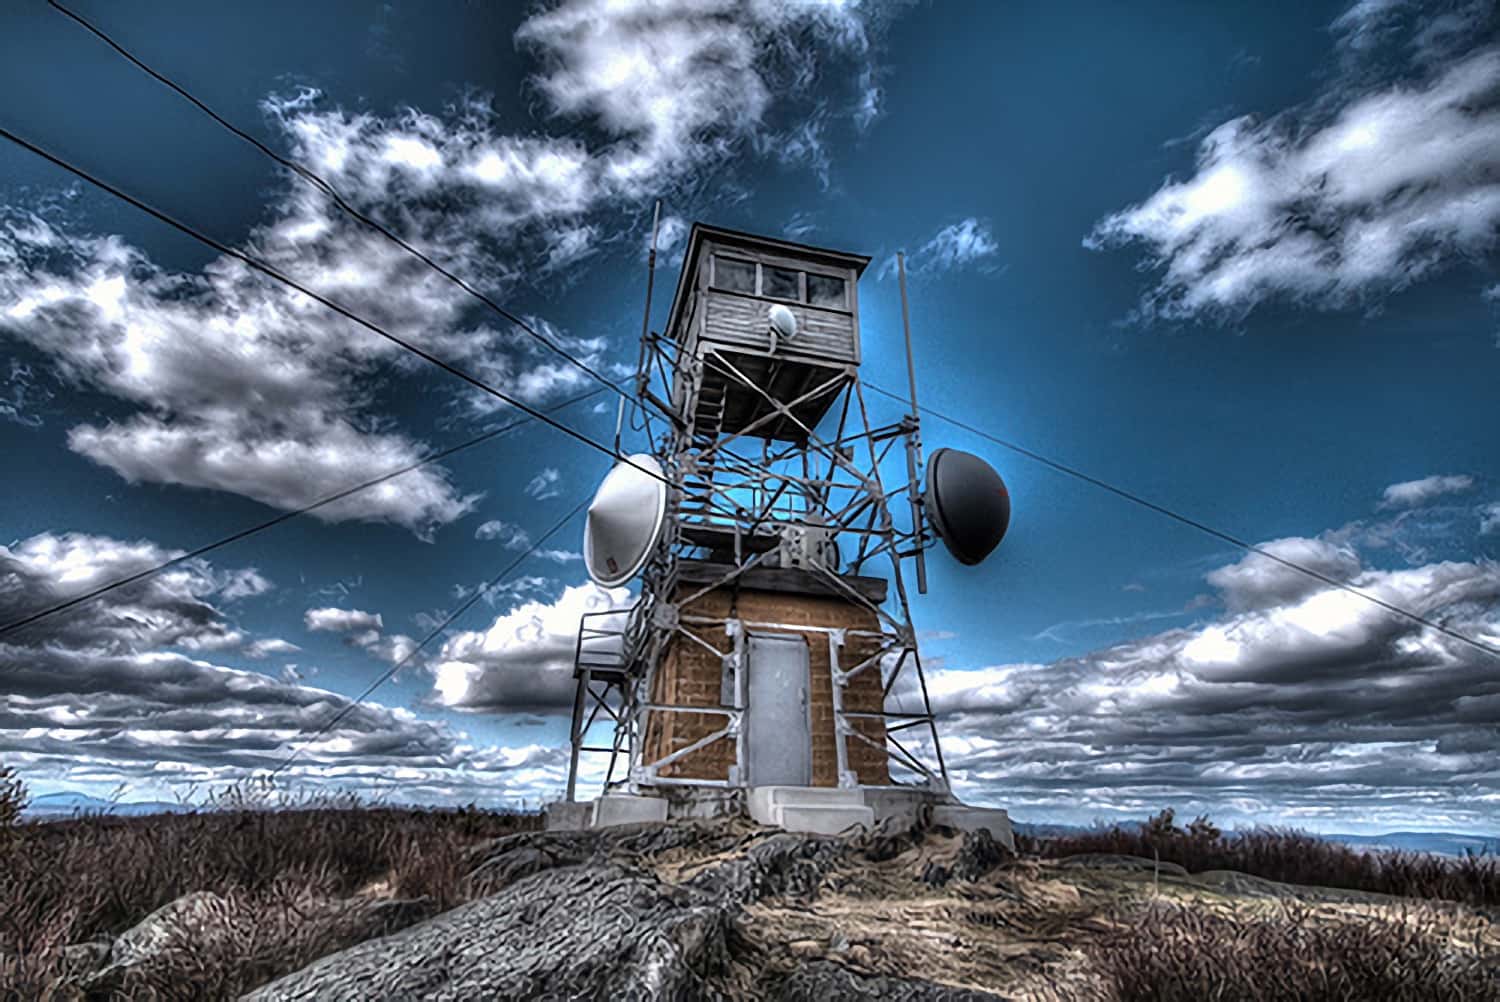 Pitcher Mountain Fire Tower. Source.